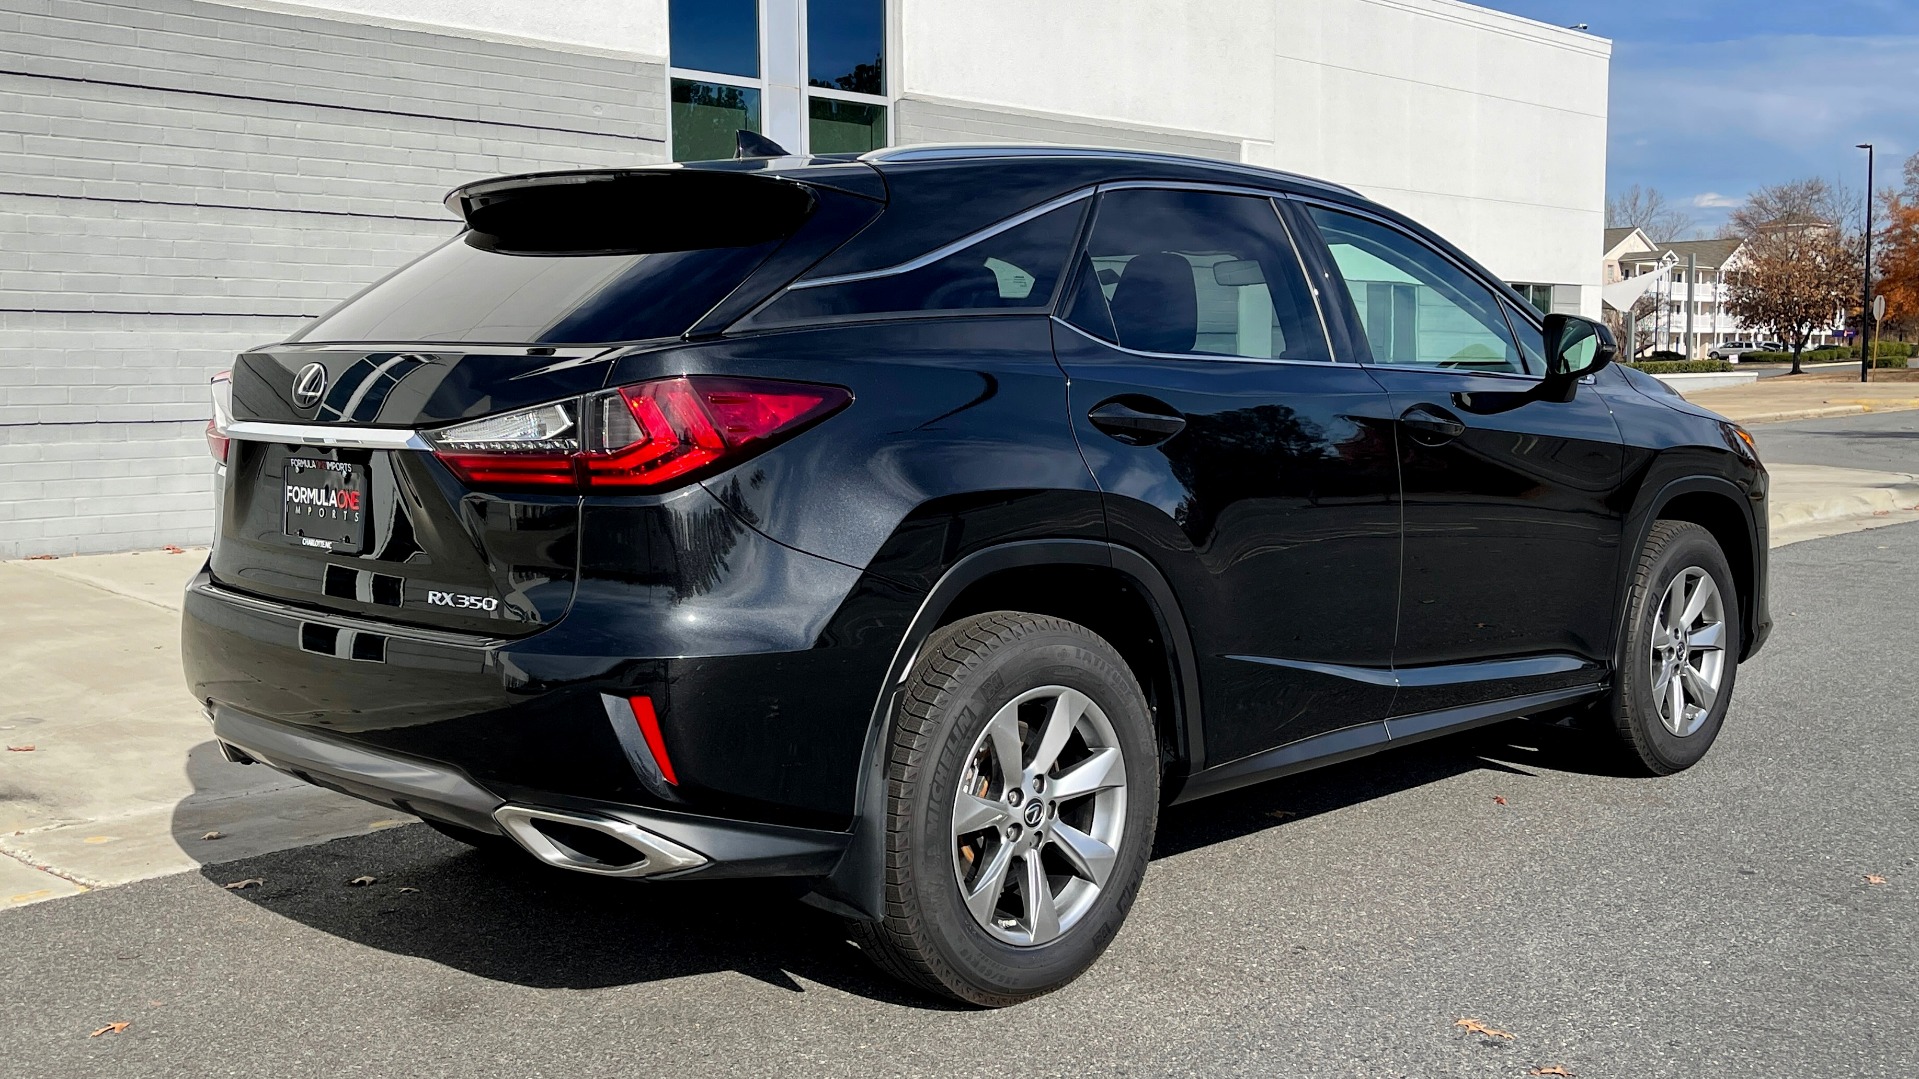 Used 2019 Lexus RX 350 3.5L SUV / AWD / SUNROOF / 18IN WHEELS / REARVIEW for sale $45,595 at Formula Imports in Charlotte NC 28227 5